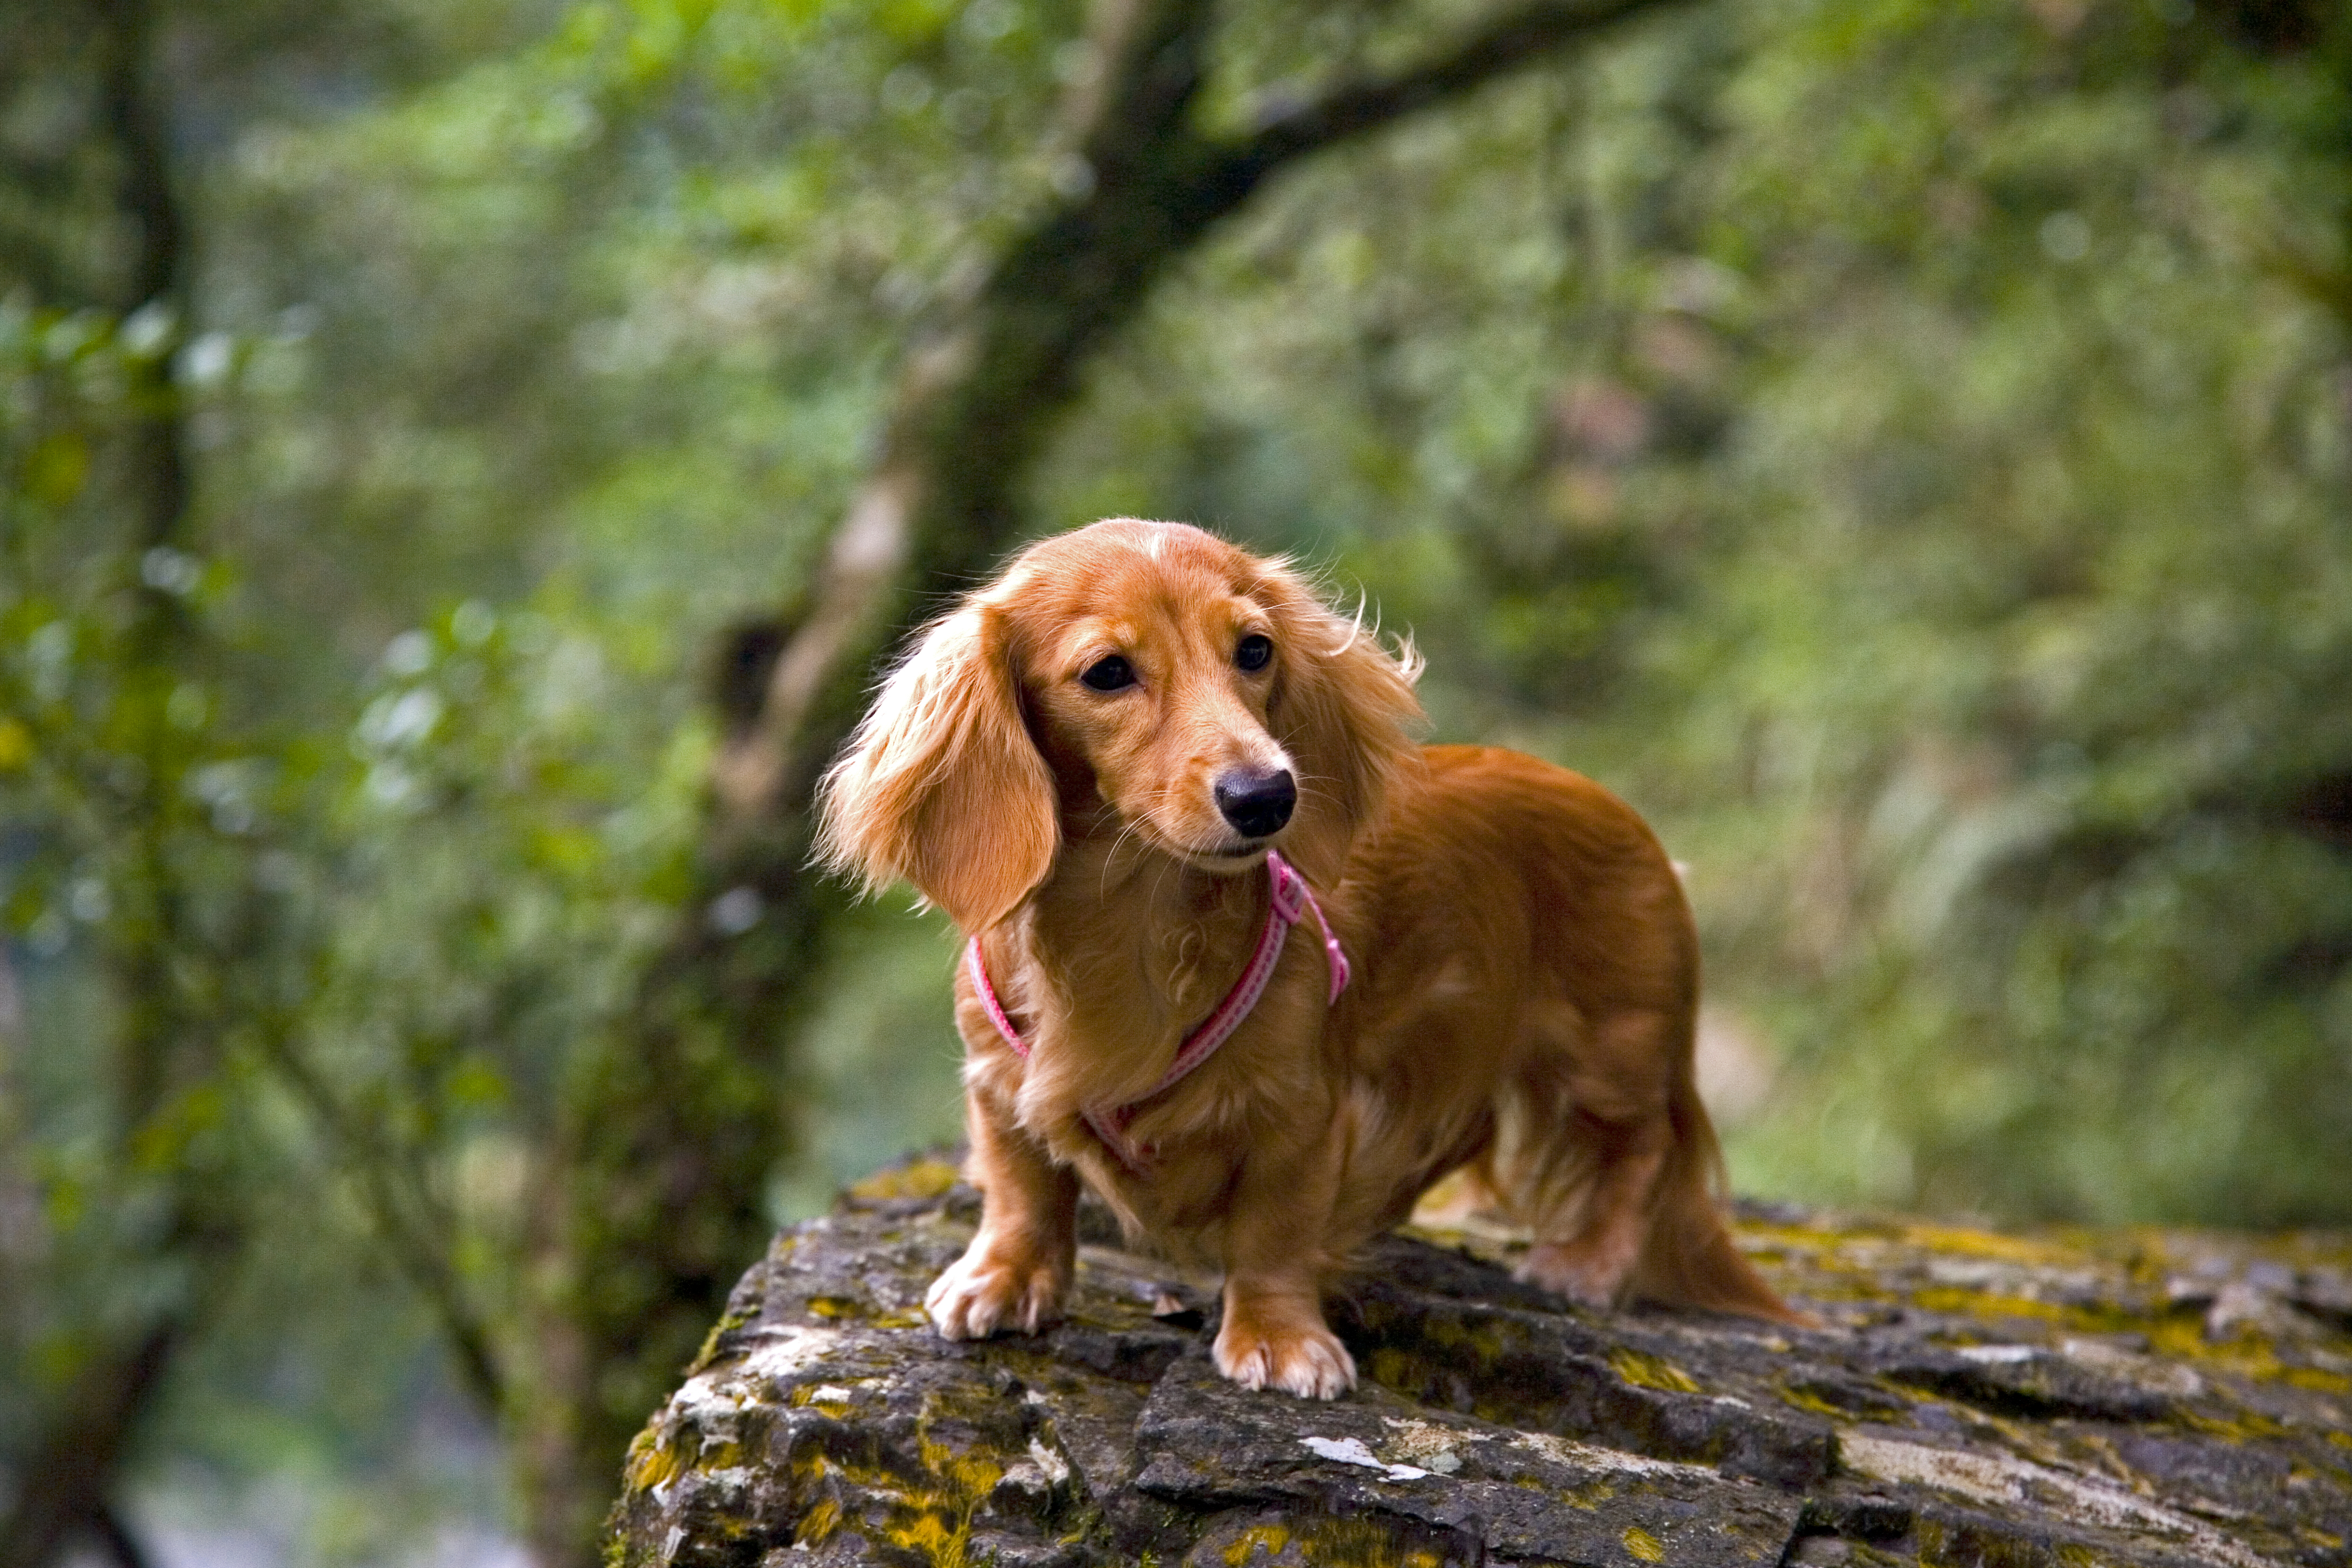 Characteristics of Long-Haired Dachshunds